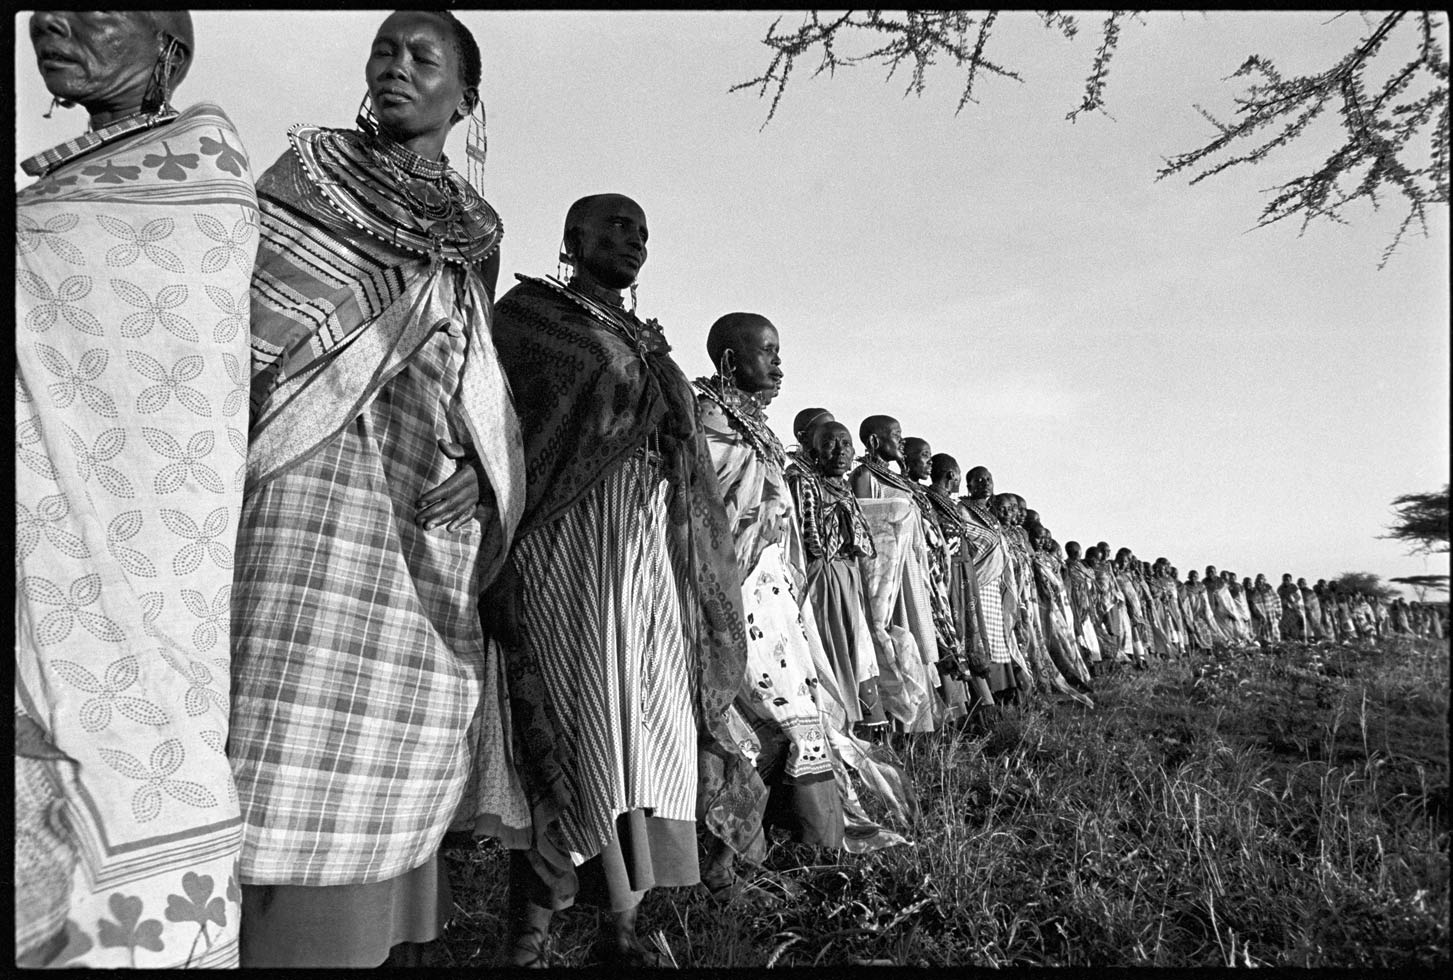 "Life is in community." African proverb

Maasai women at a blessing ceremony which takes place every seven to ten years. They spend several days talking about their problems and participating in organized rituals that have been handed down by their ancestors. 

Southern Kenya 1995